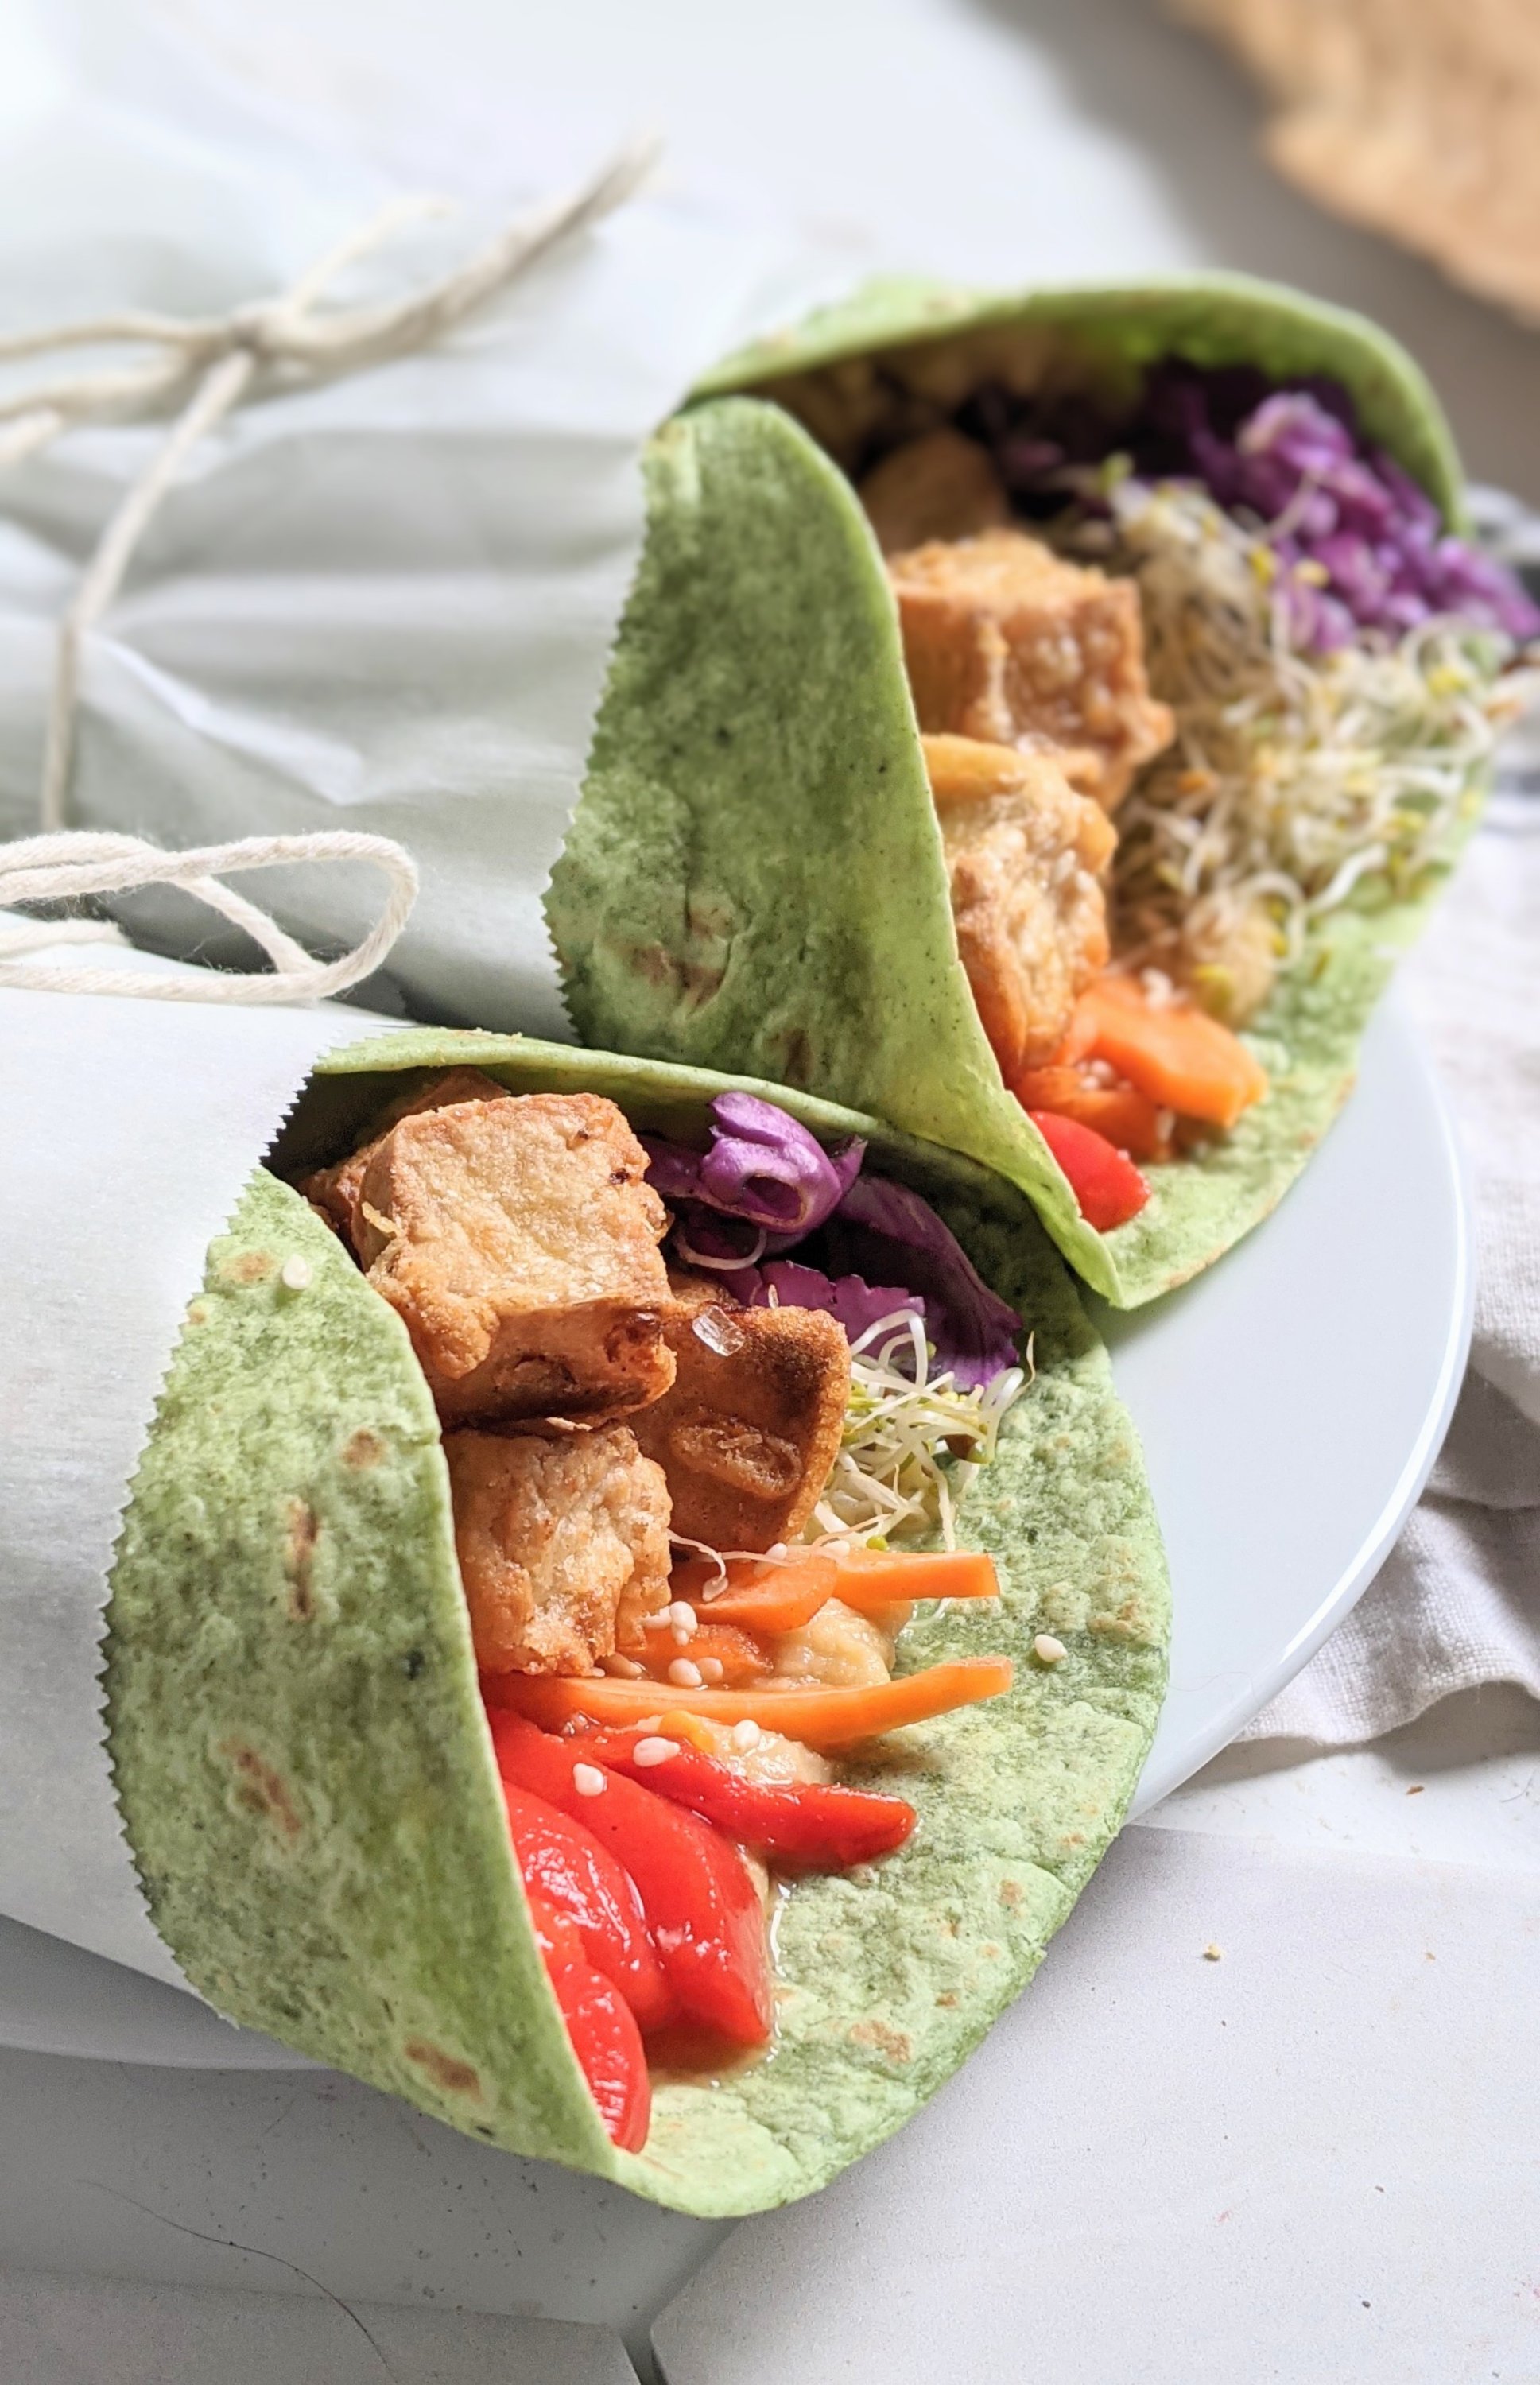 high protein vegetarian lunches lunch ideas recipes healthy vegan sandwiches wraps with crispy tofu filling vegan meal ideas keep you full until dinner plant based protein recipes healthy